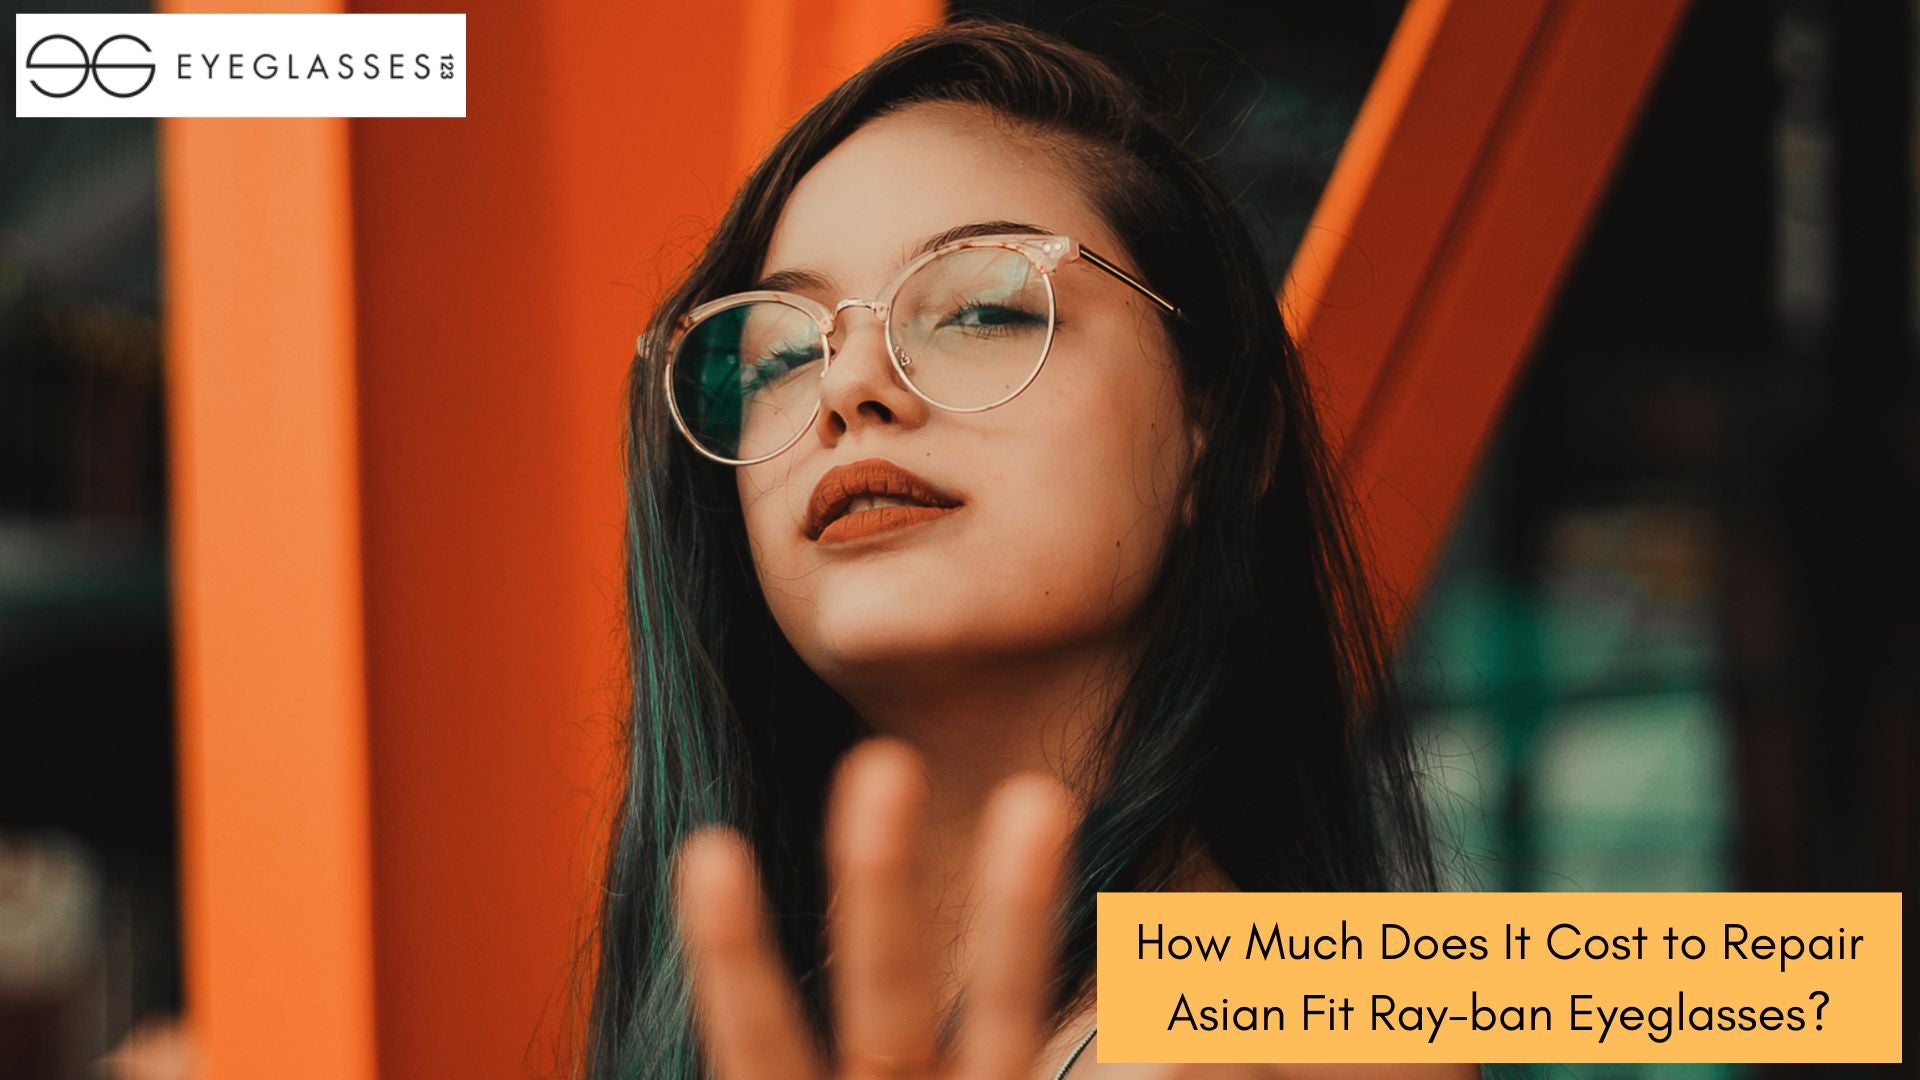 How Much Does It Cost to Repair Asian Fit Ray-ban Eyeglasses?